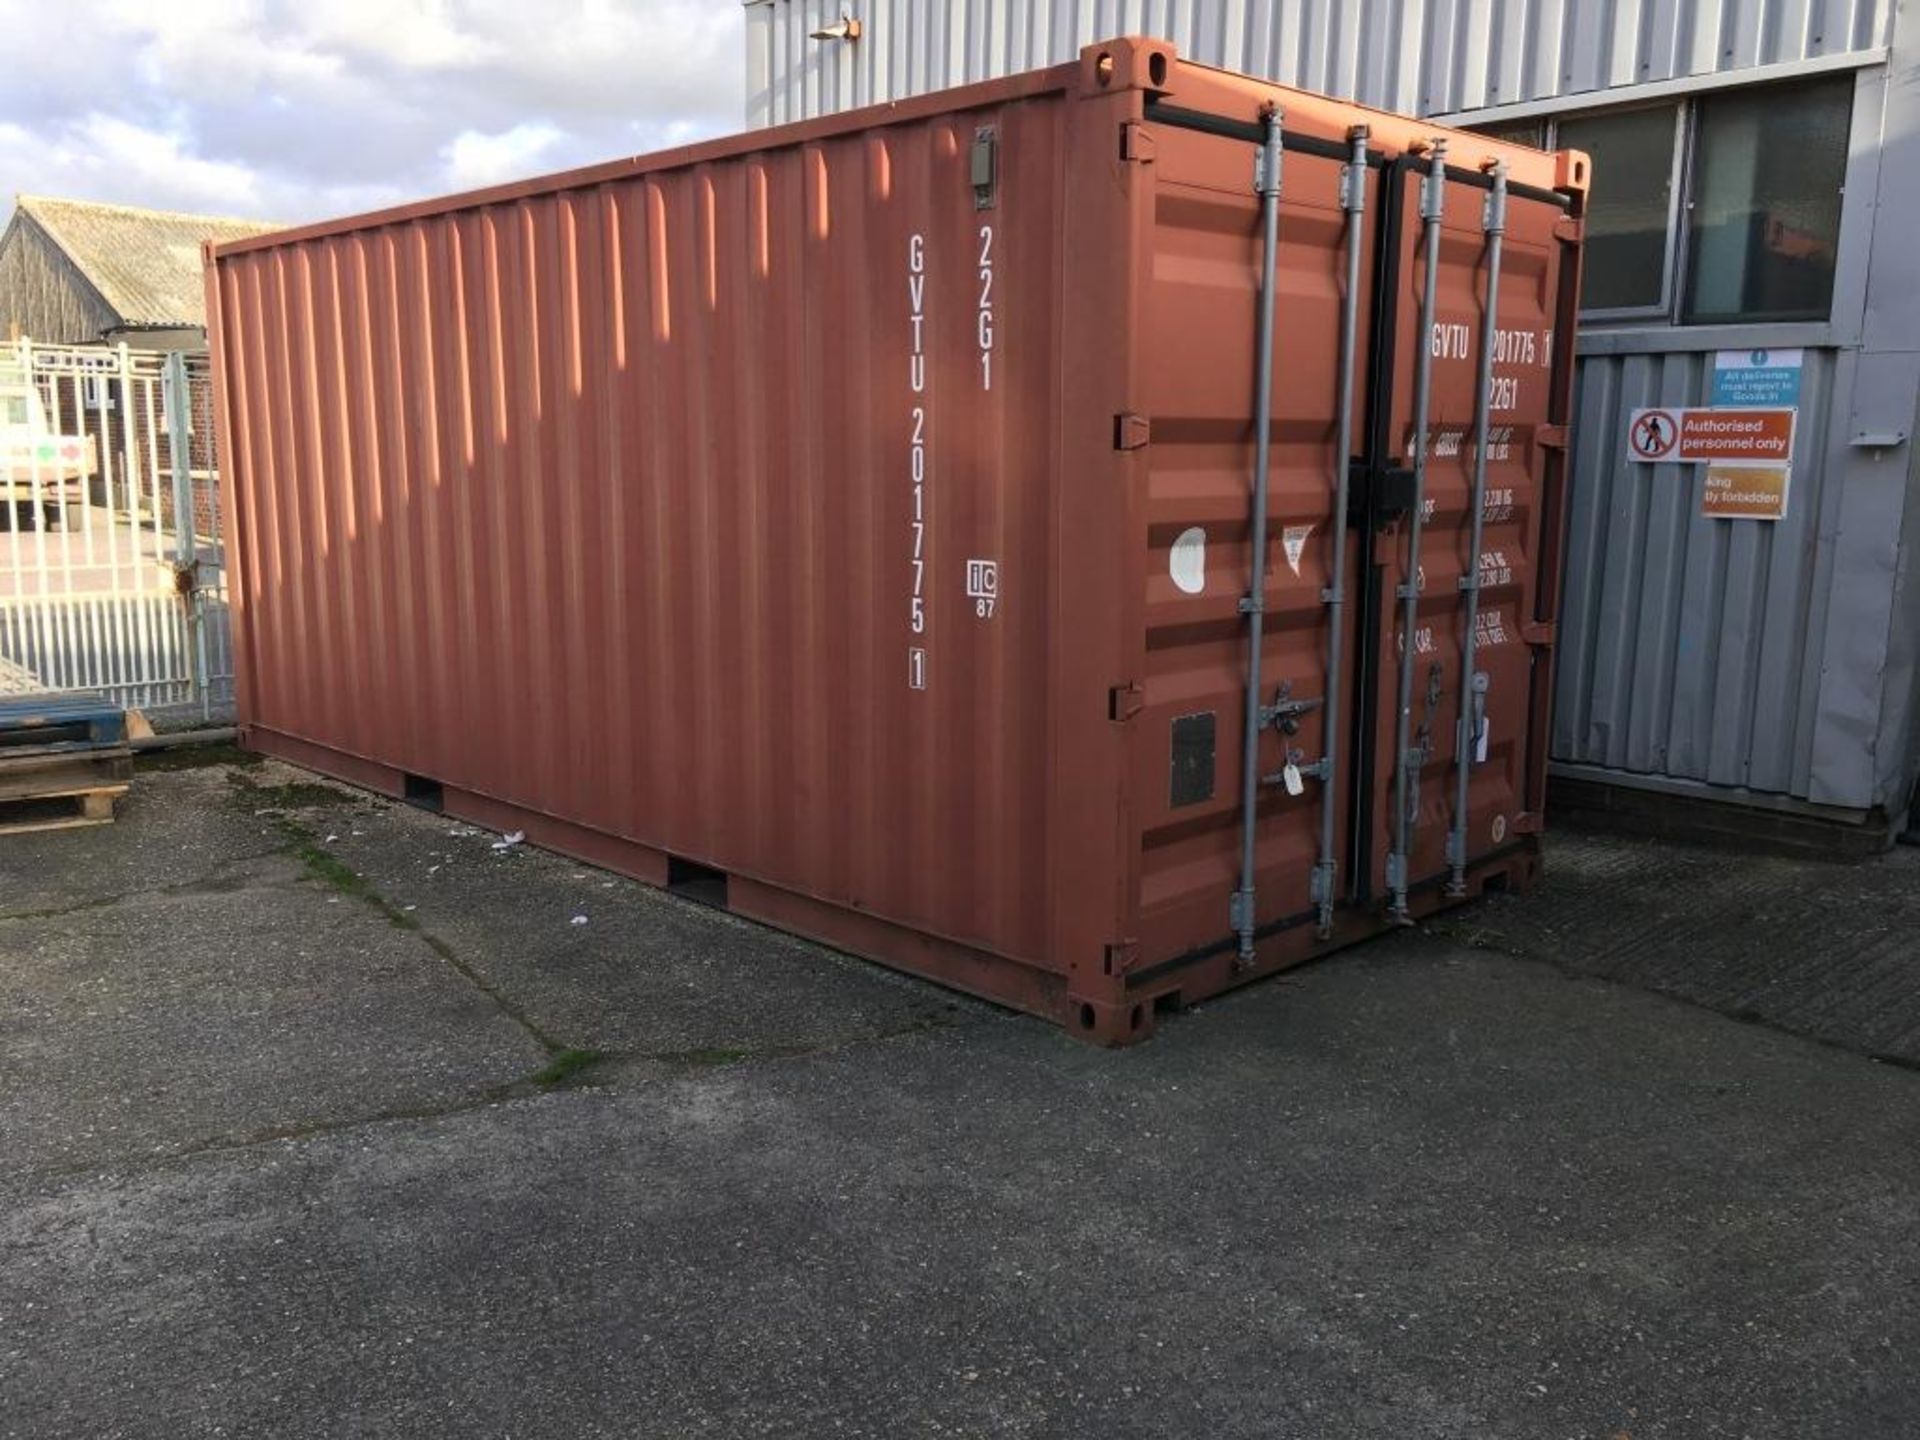 20' cargo container, Year of manufacture 2004. A work Method Statement and Risk Assessment must be